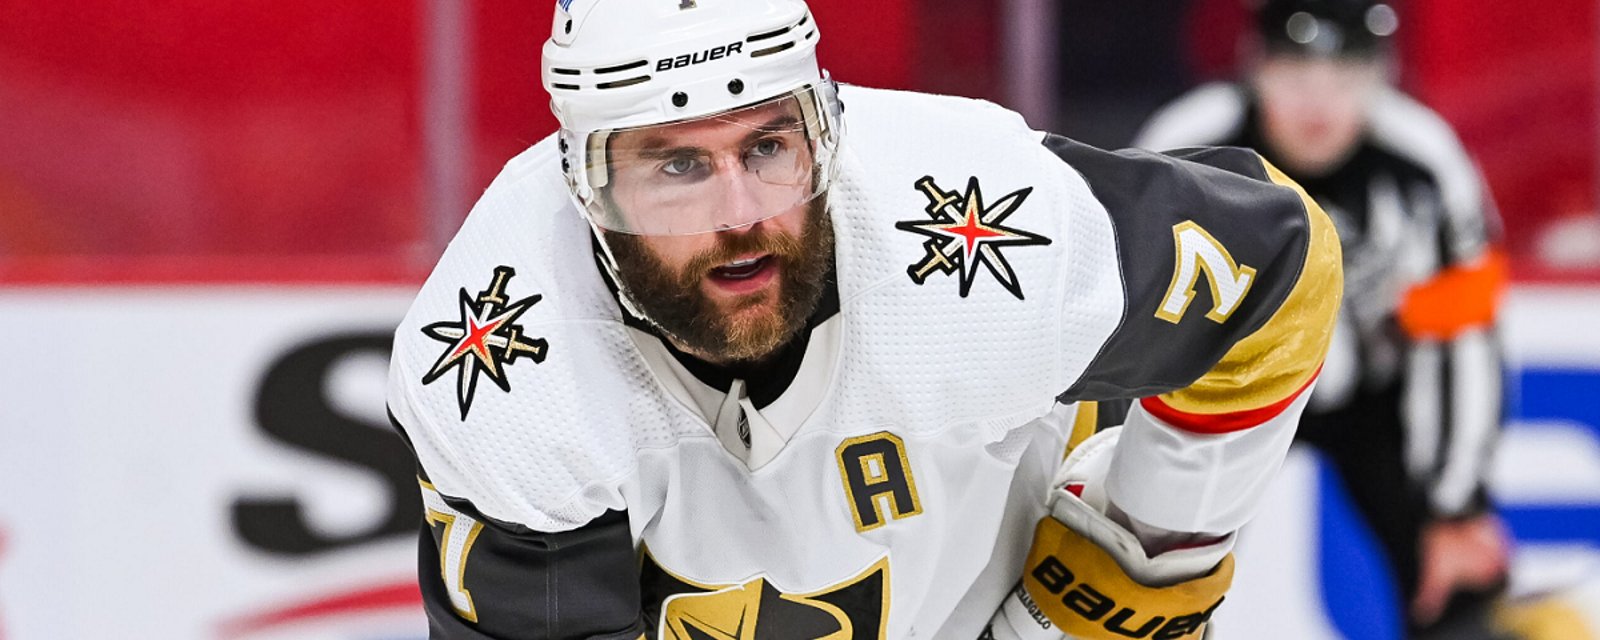 Pietrangelo warns the Golden Knights are bringing 'extra juice' for Game 6.